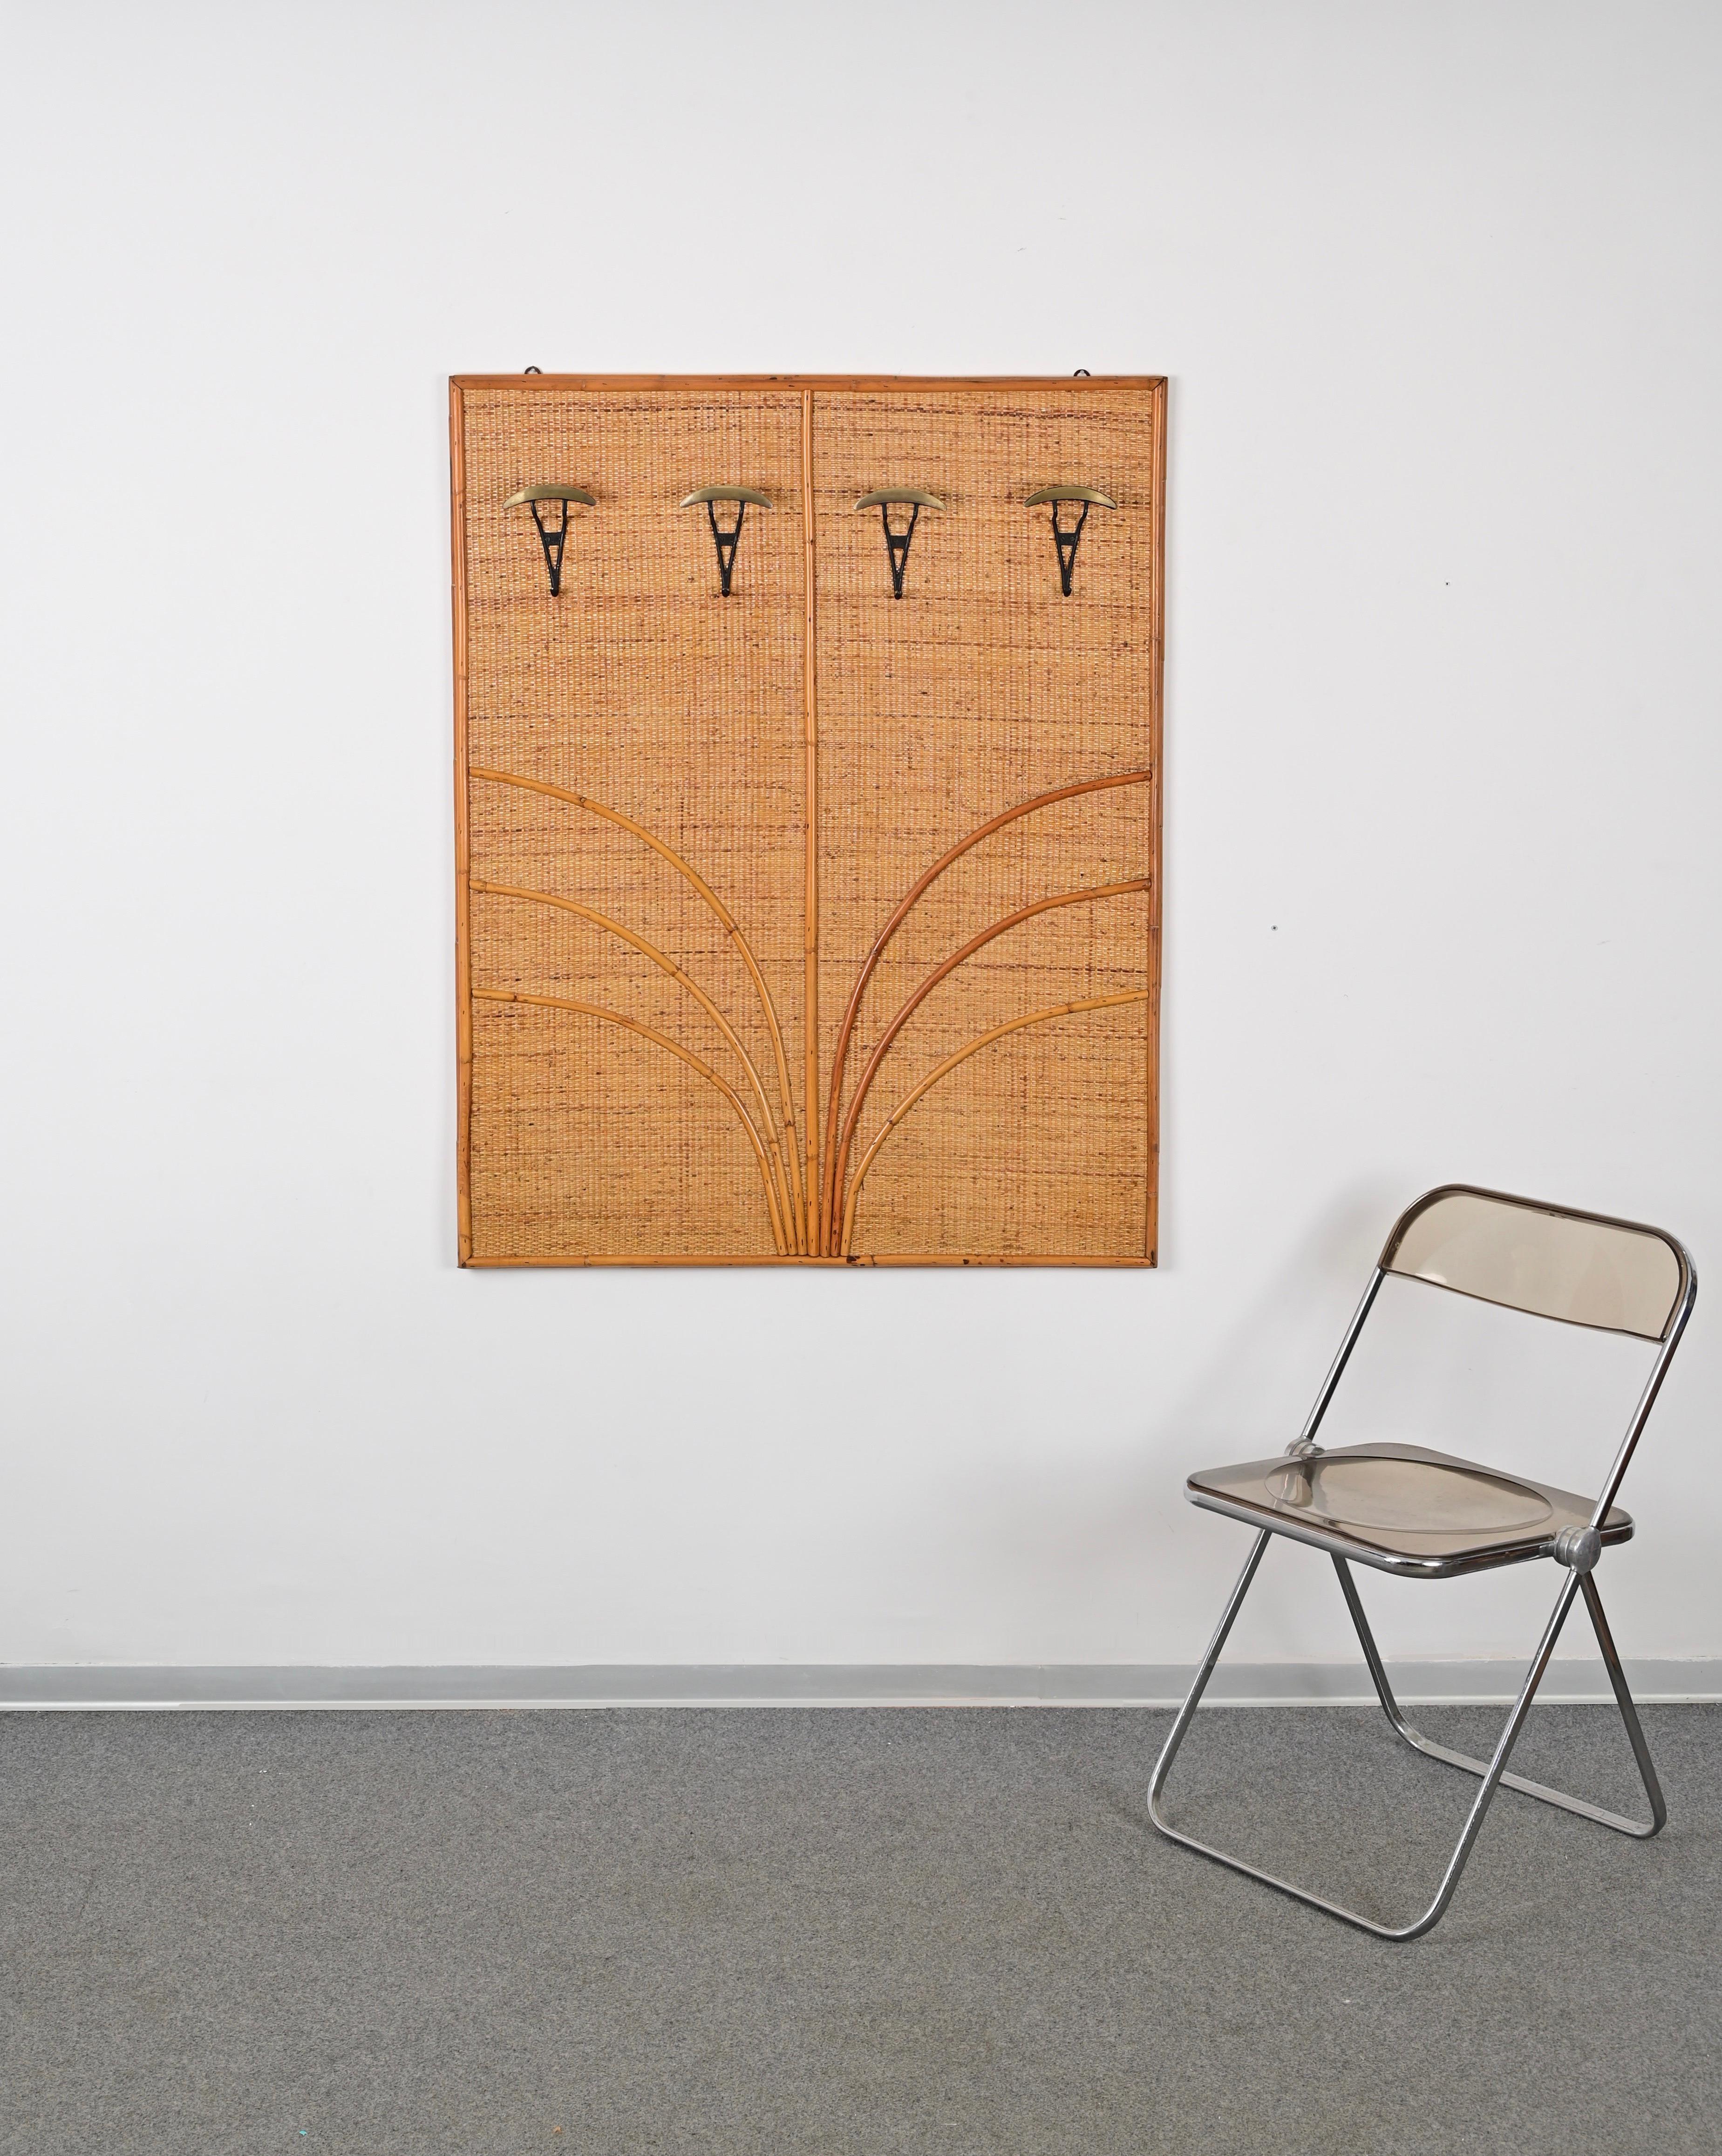 Vivai Del Sud Italian Coat Rack in Rattan, Bamboo and Brass, Italy 1970s For Sale 4